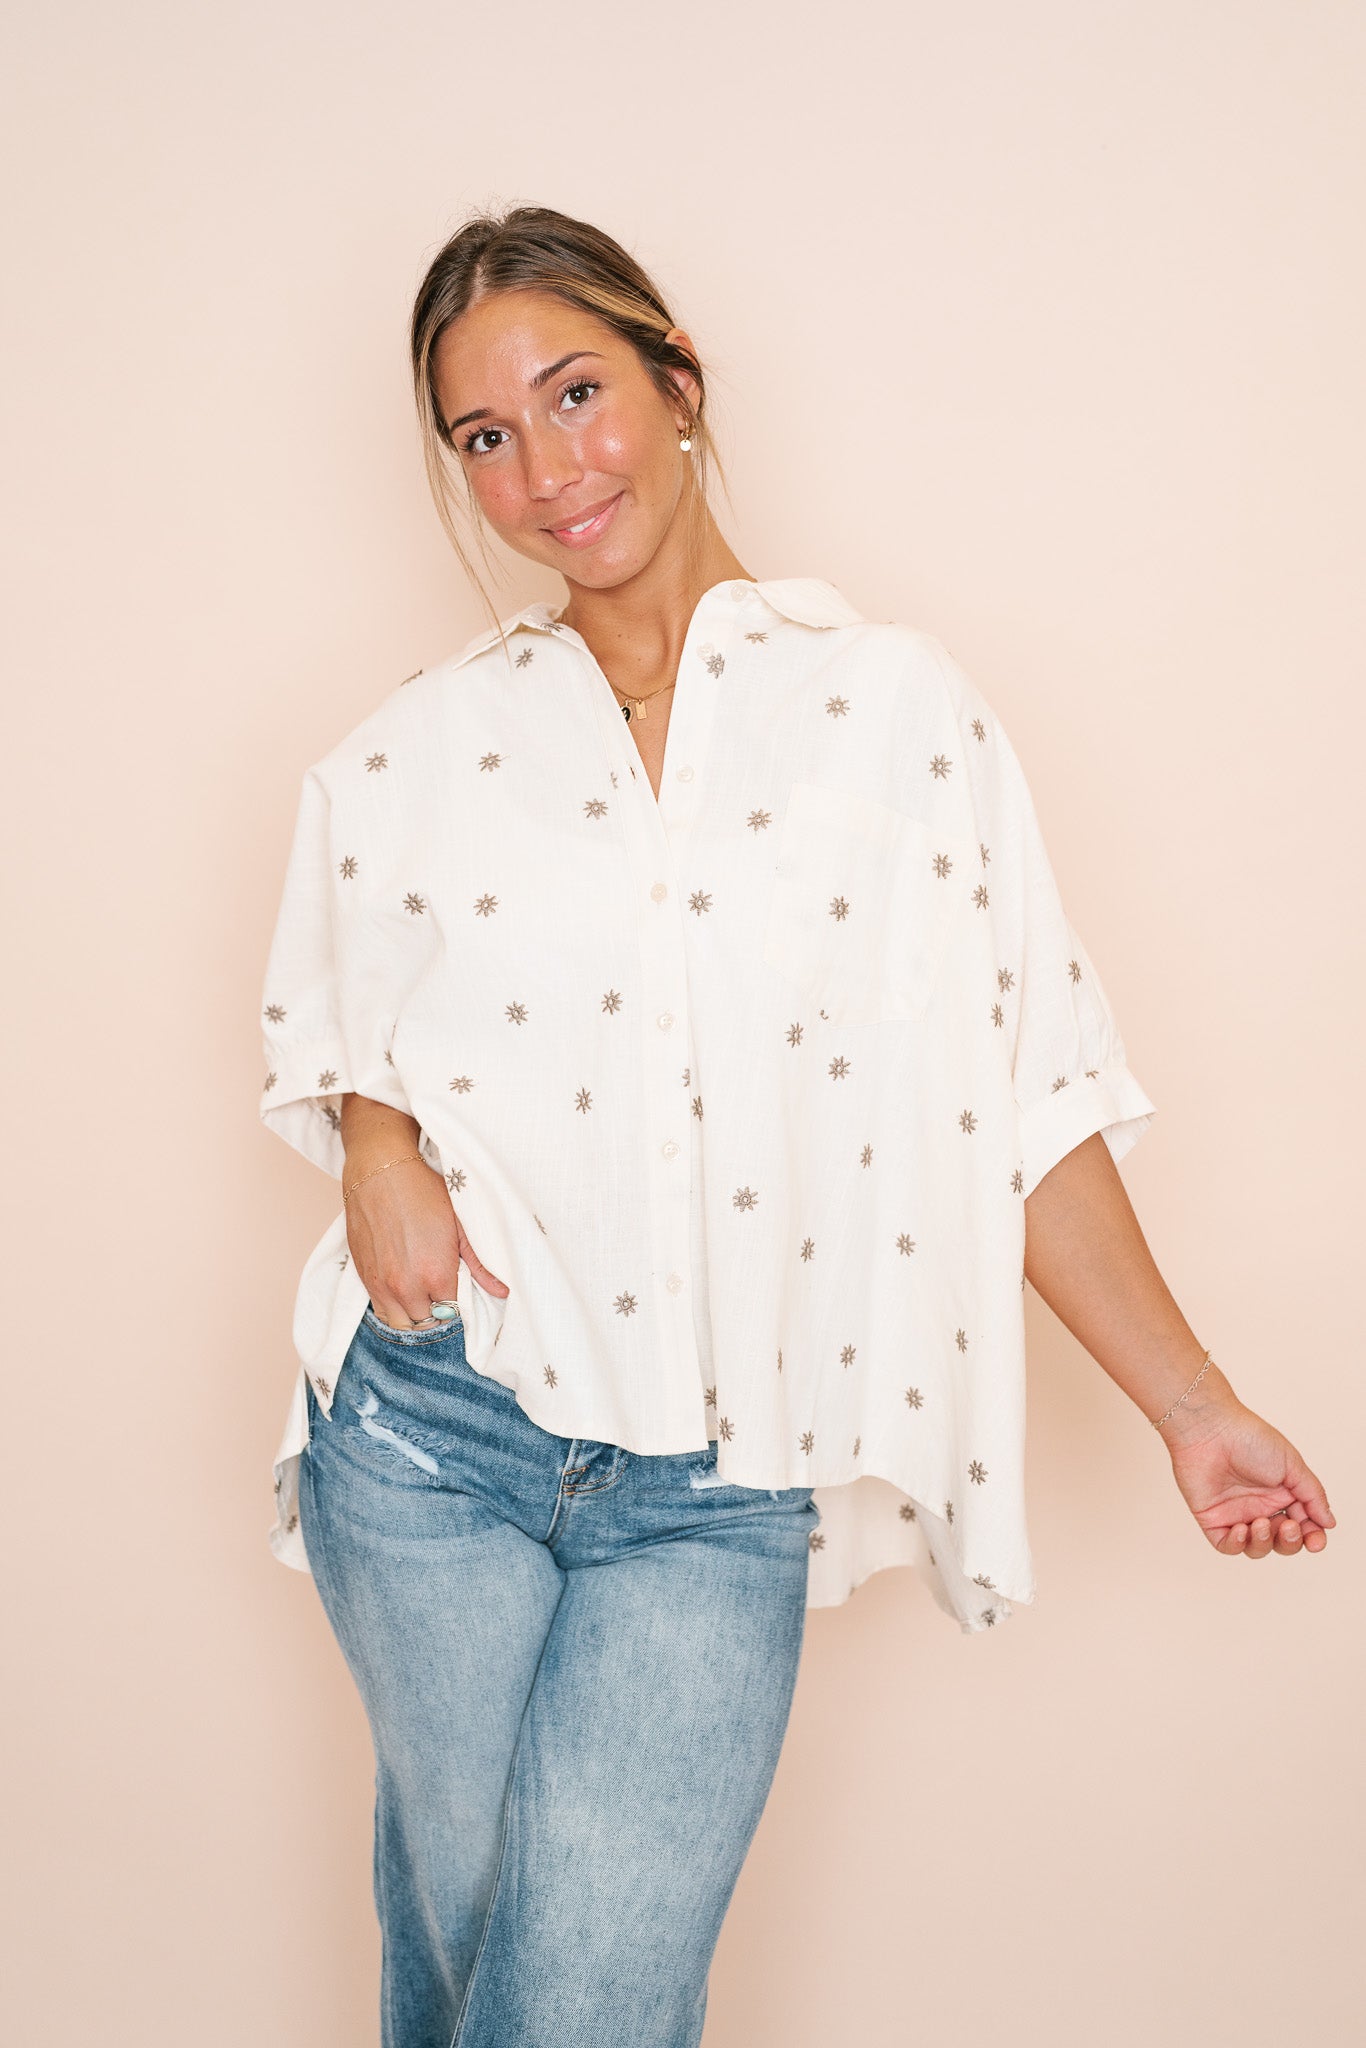 Autumn Vibes Button Up Top